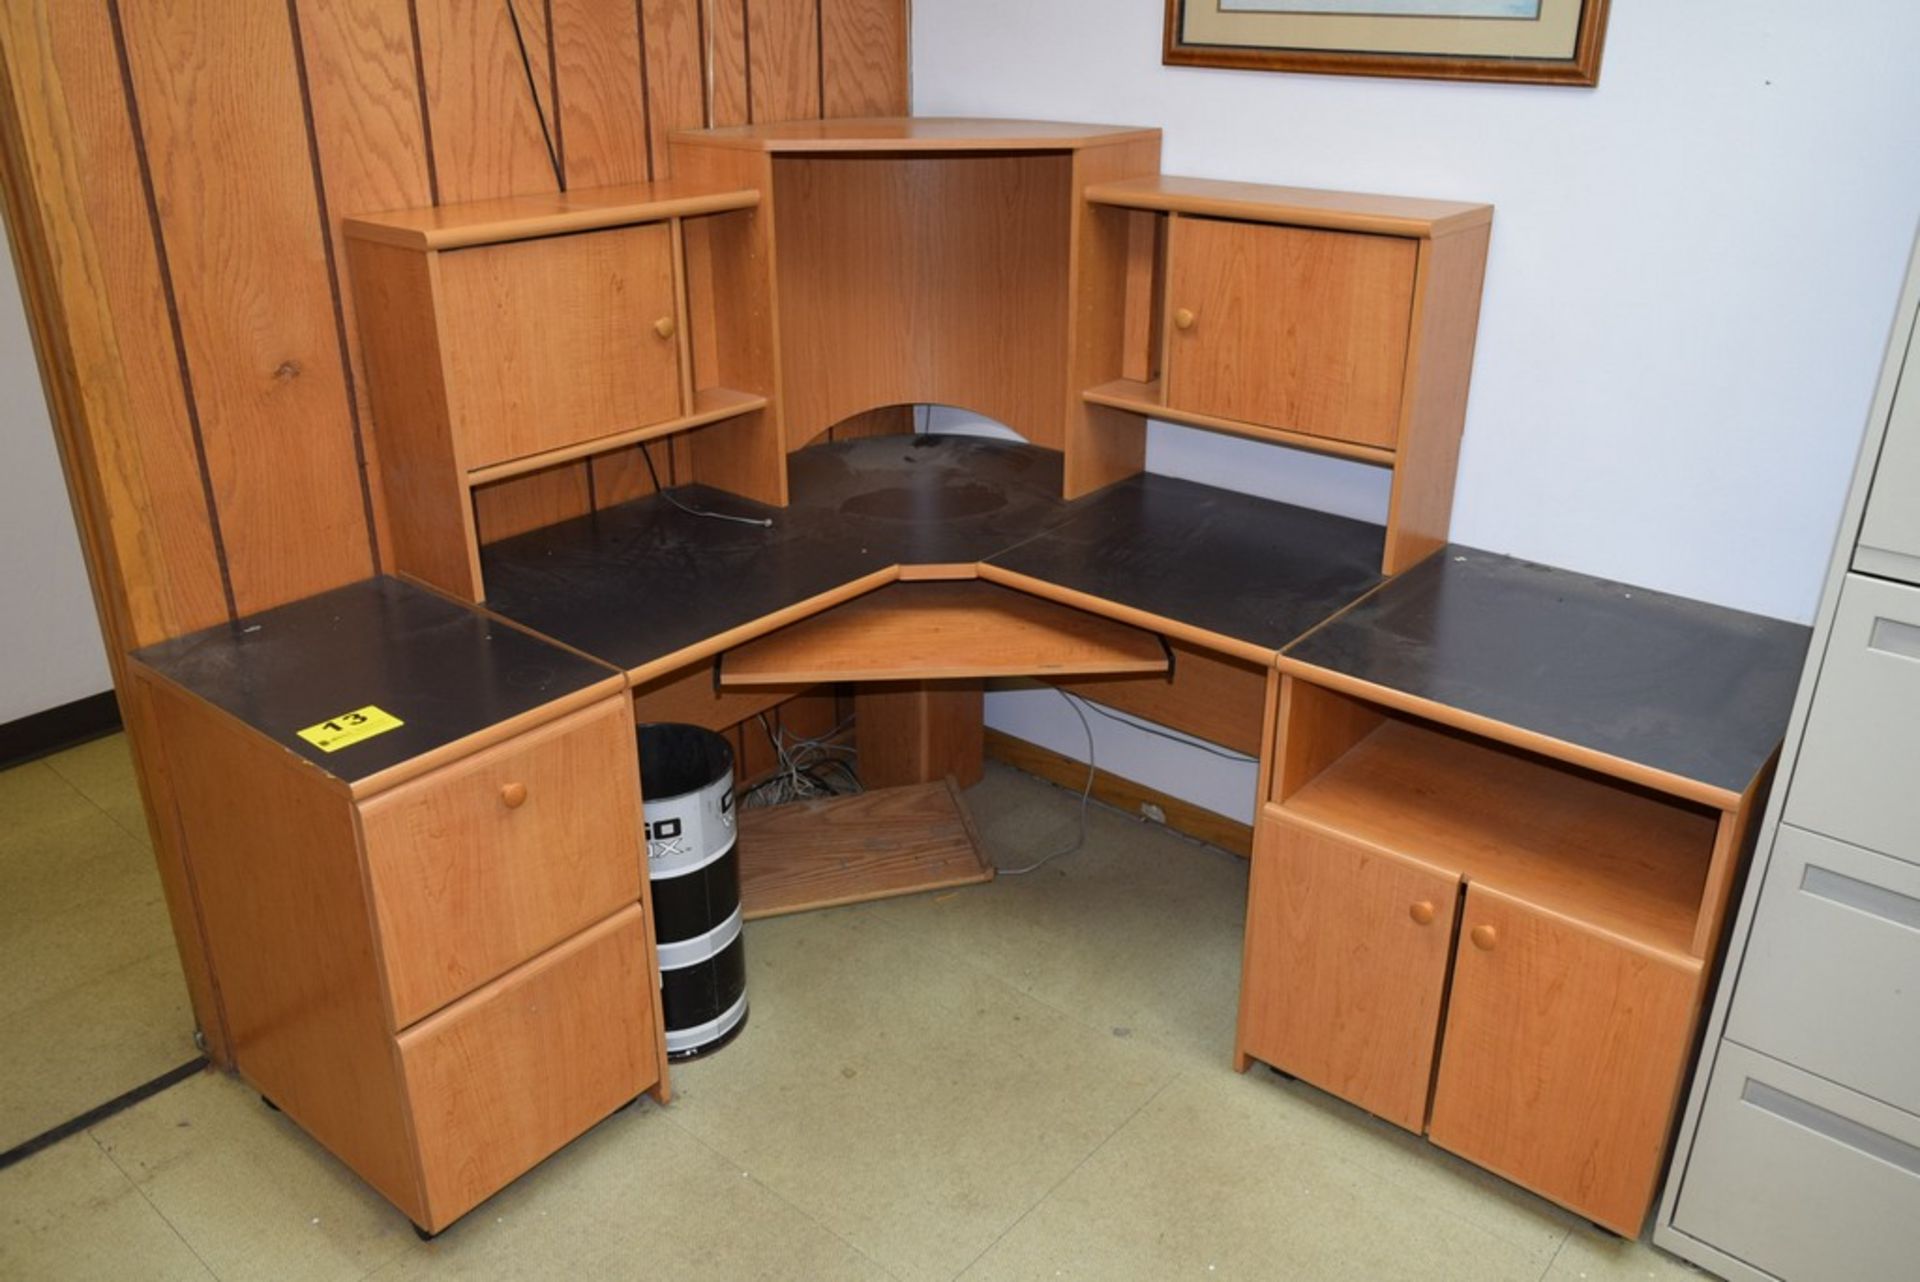 THREE PIECE WOOD LAMINATE CORNER COMPUTER WORK STATIONS DESK WITH HUTCH, TWO DRAW FILE CABINET,